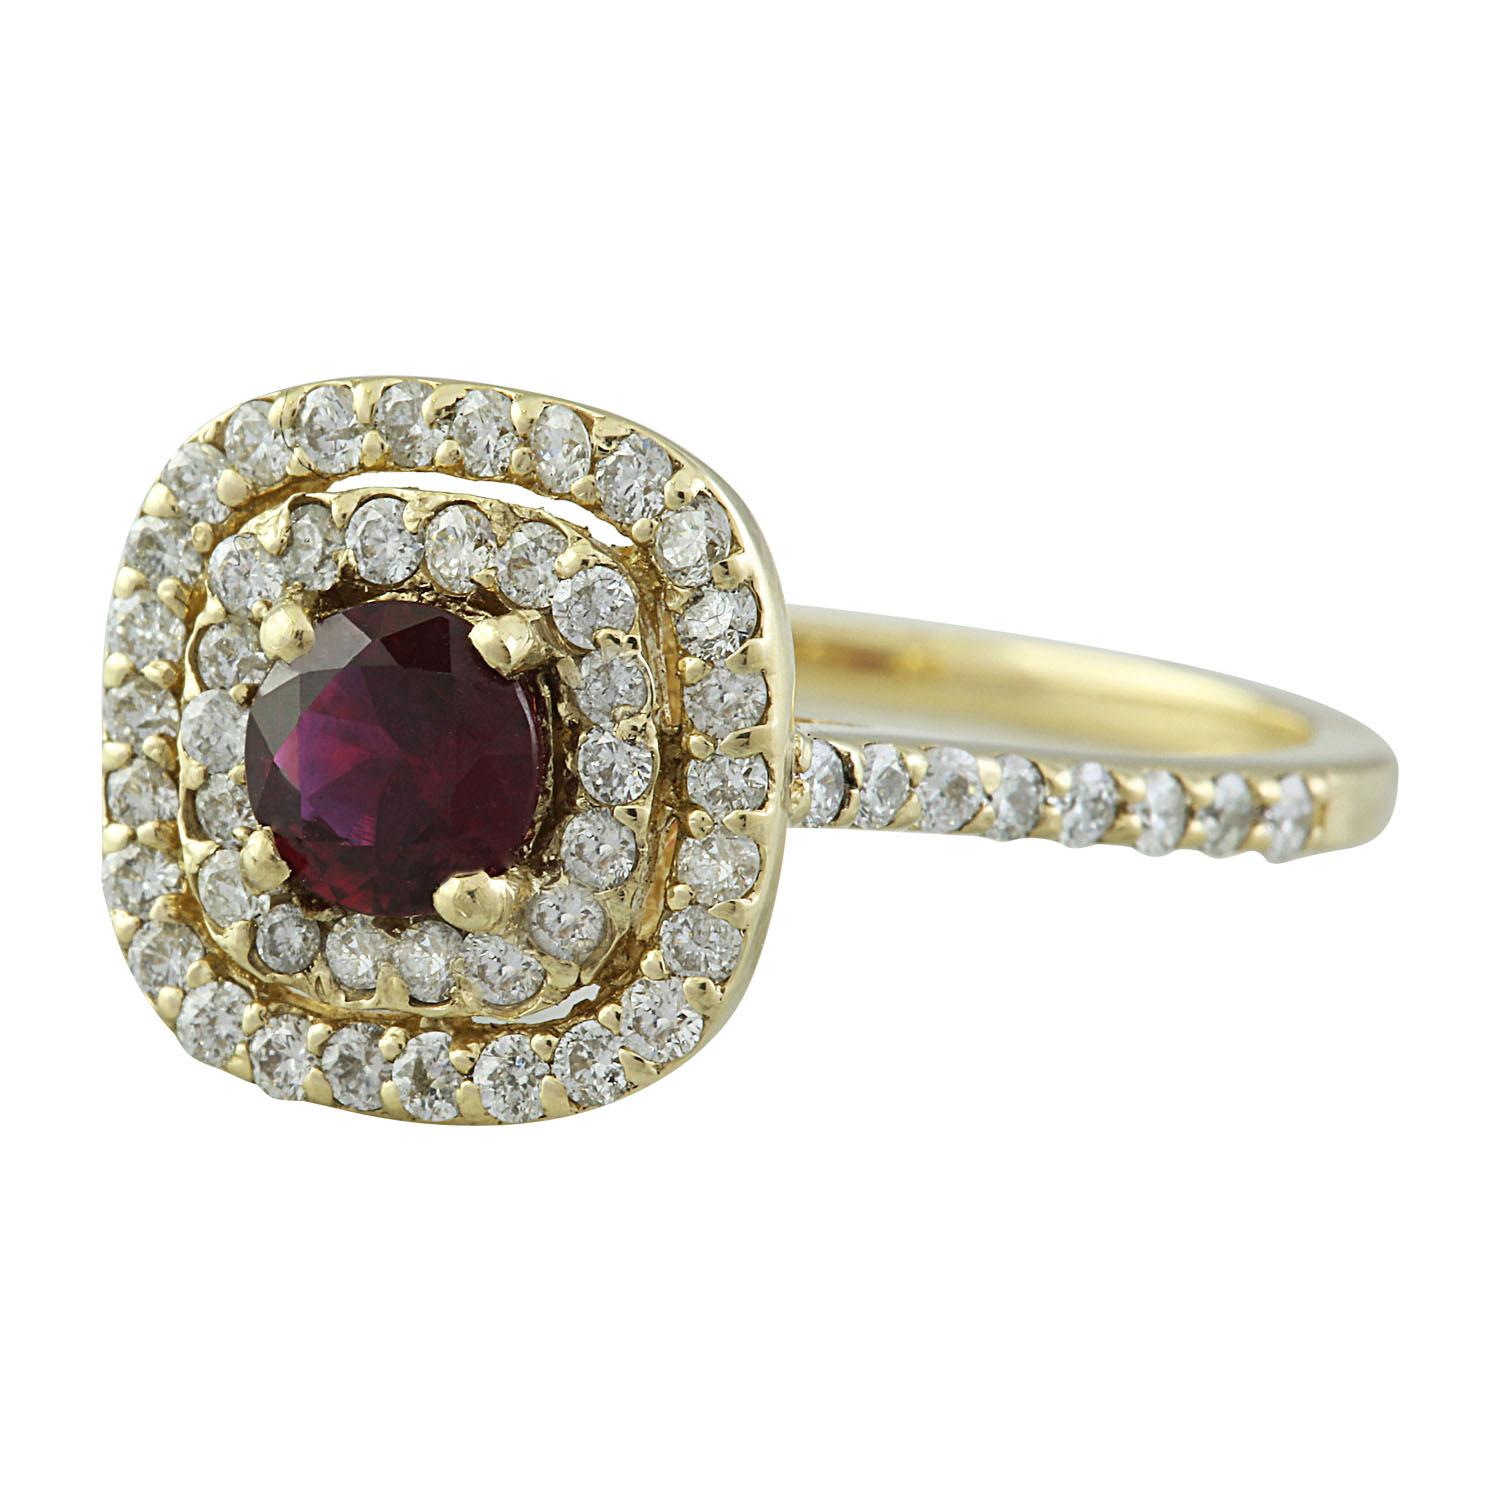 1.40 Carat Natural Ruby 14 Karat Solid Yellow Gold Diamond Ring
Stamped: 14K 
Ring Size: 7 
Ring Weight: 3.5 Grams 
Ruby Weight: 0.50 Carat (4.80 Millimeter)
Diamond Weight: 0.90 Carat (F-G Color, VS2-SI1 Clarity)
Face Measures: 11.40x11.40